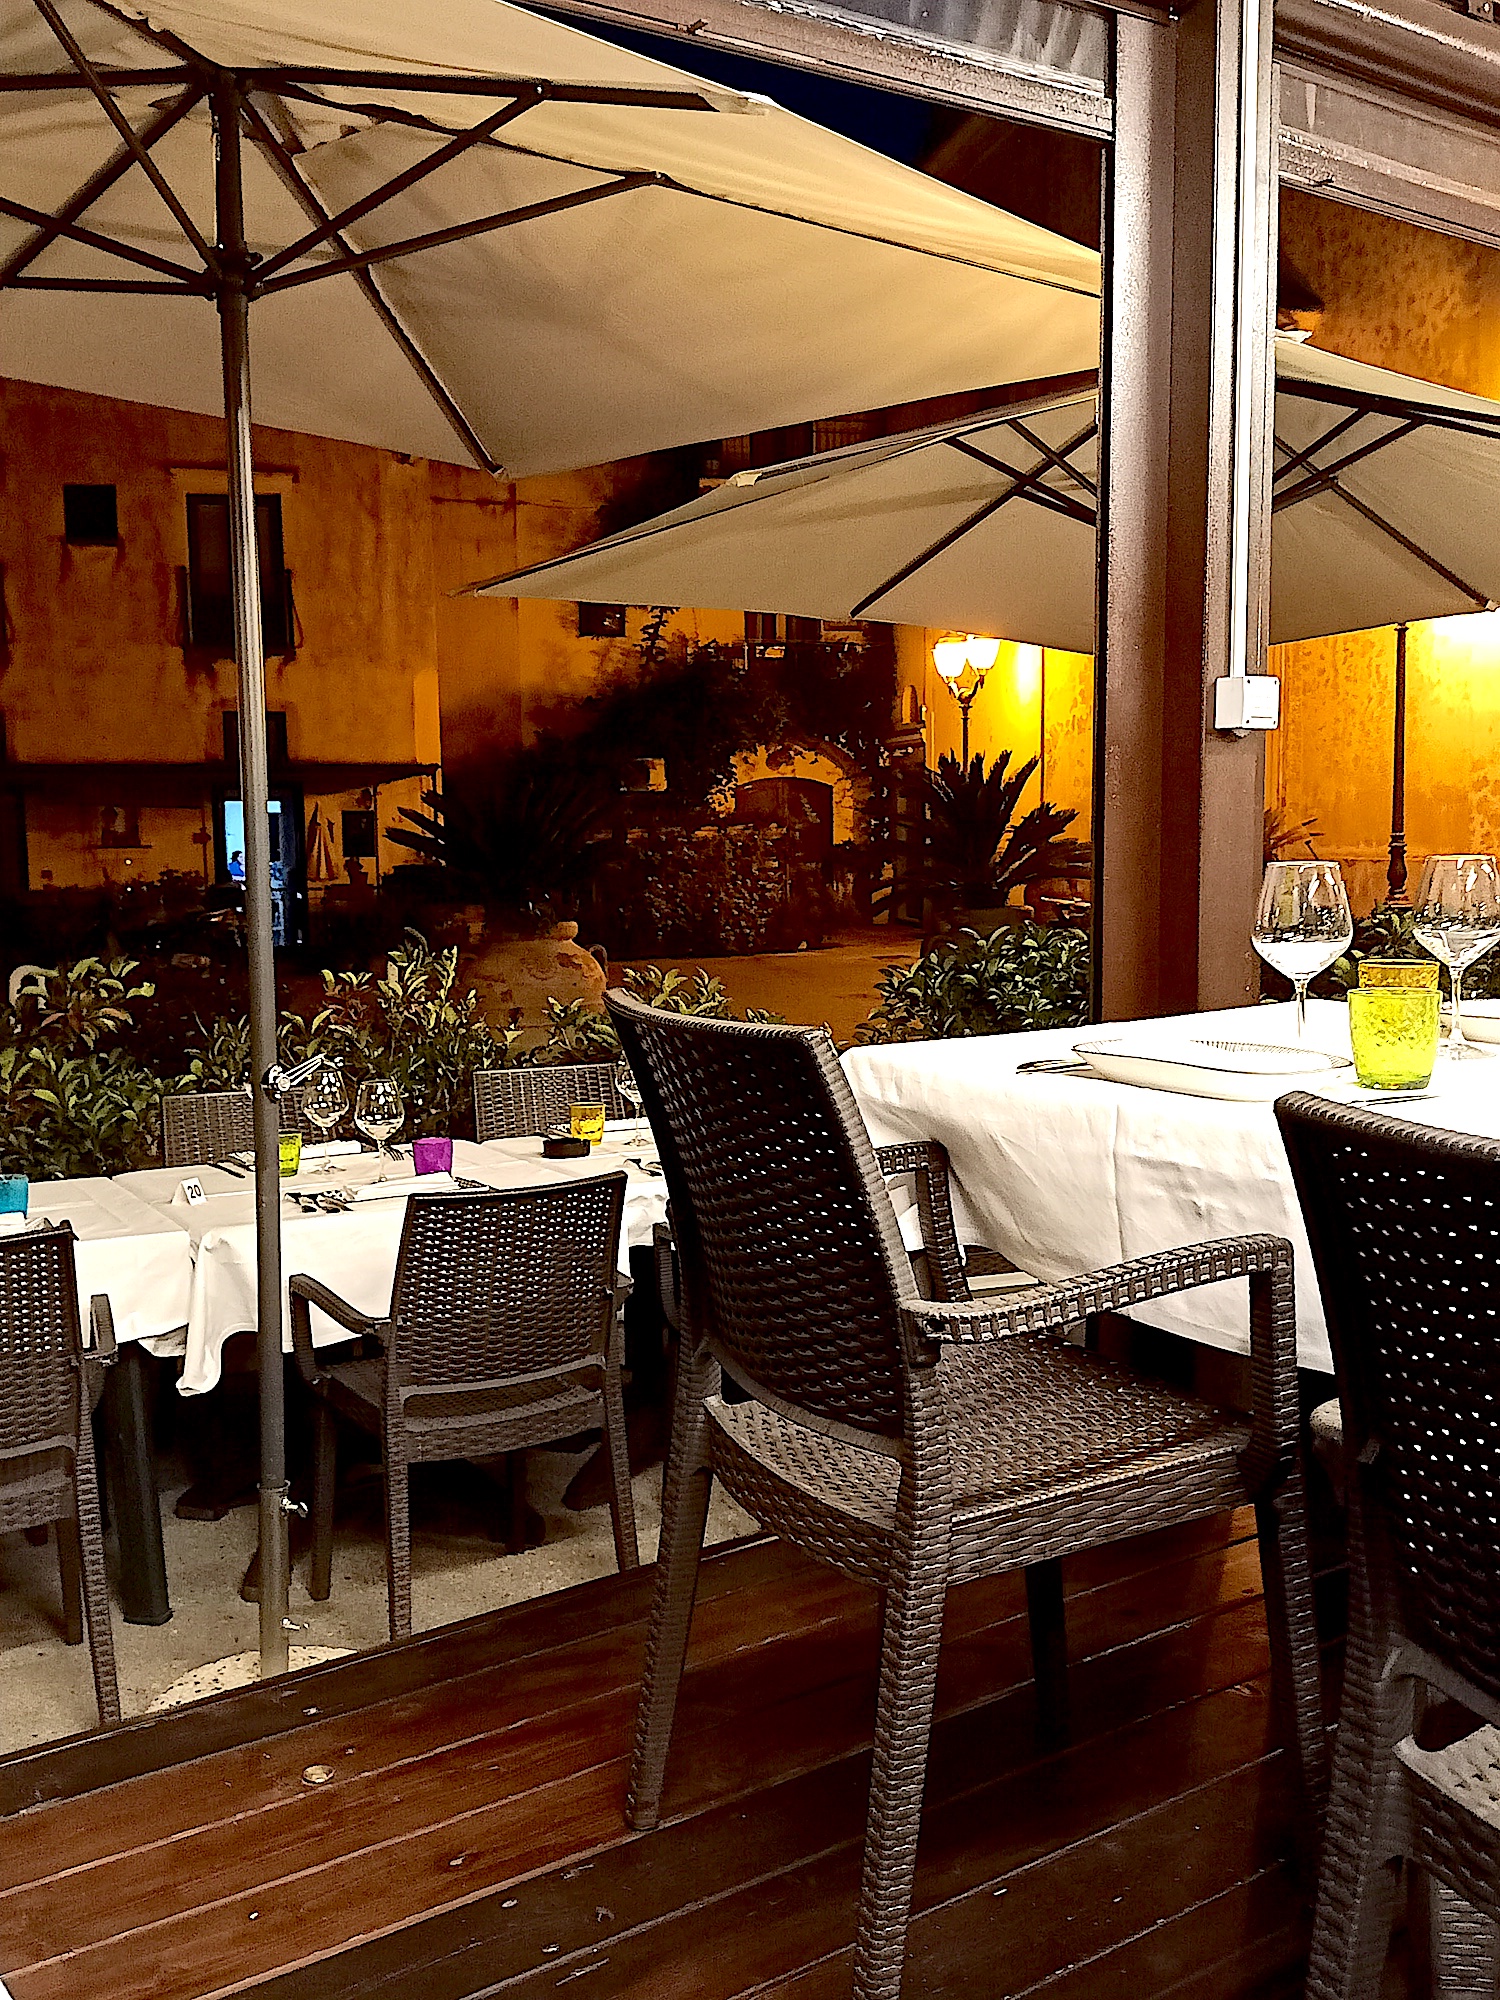 La Torre | Slow Food Restaurant in Massa Lubrense - Our Edible Italy